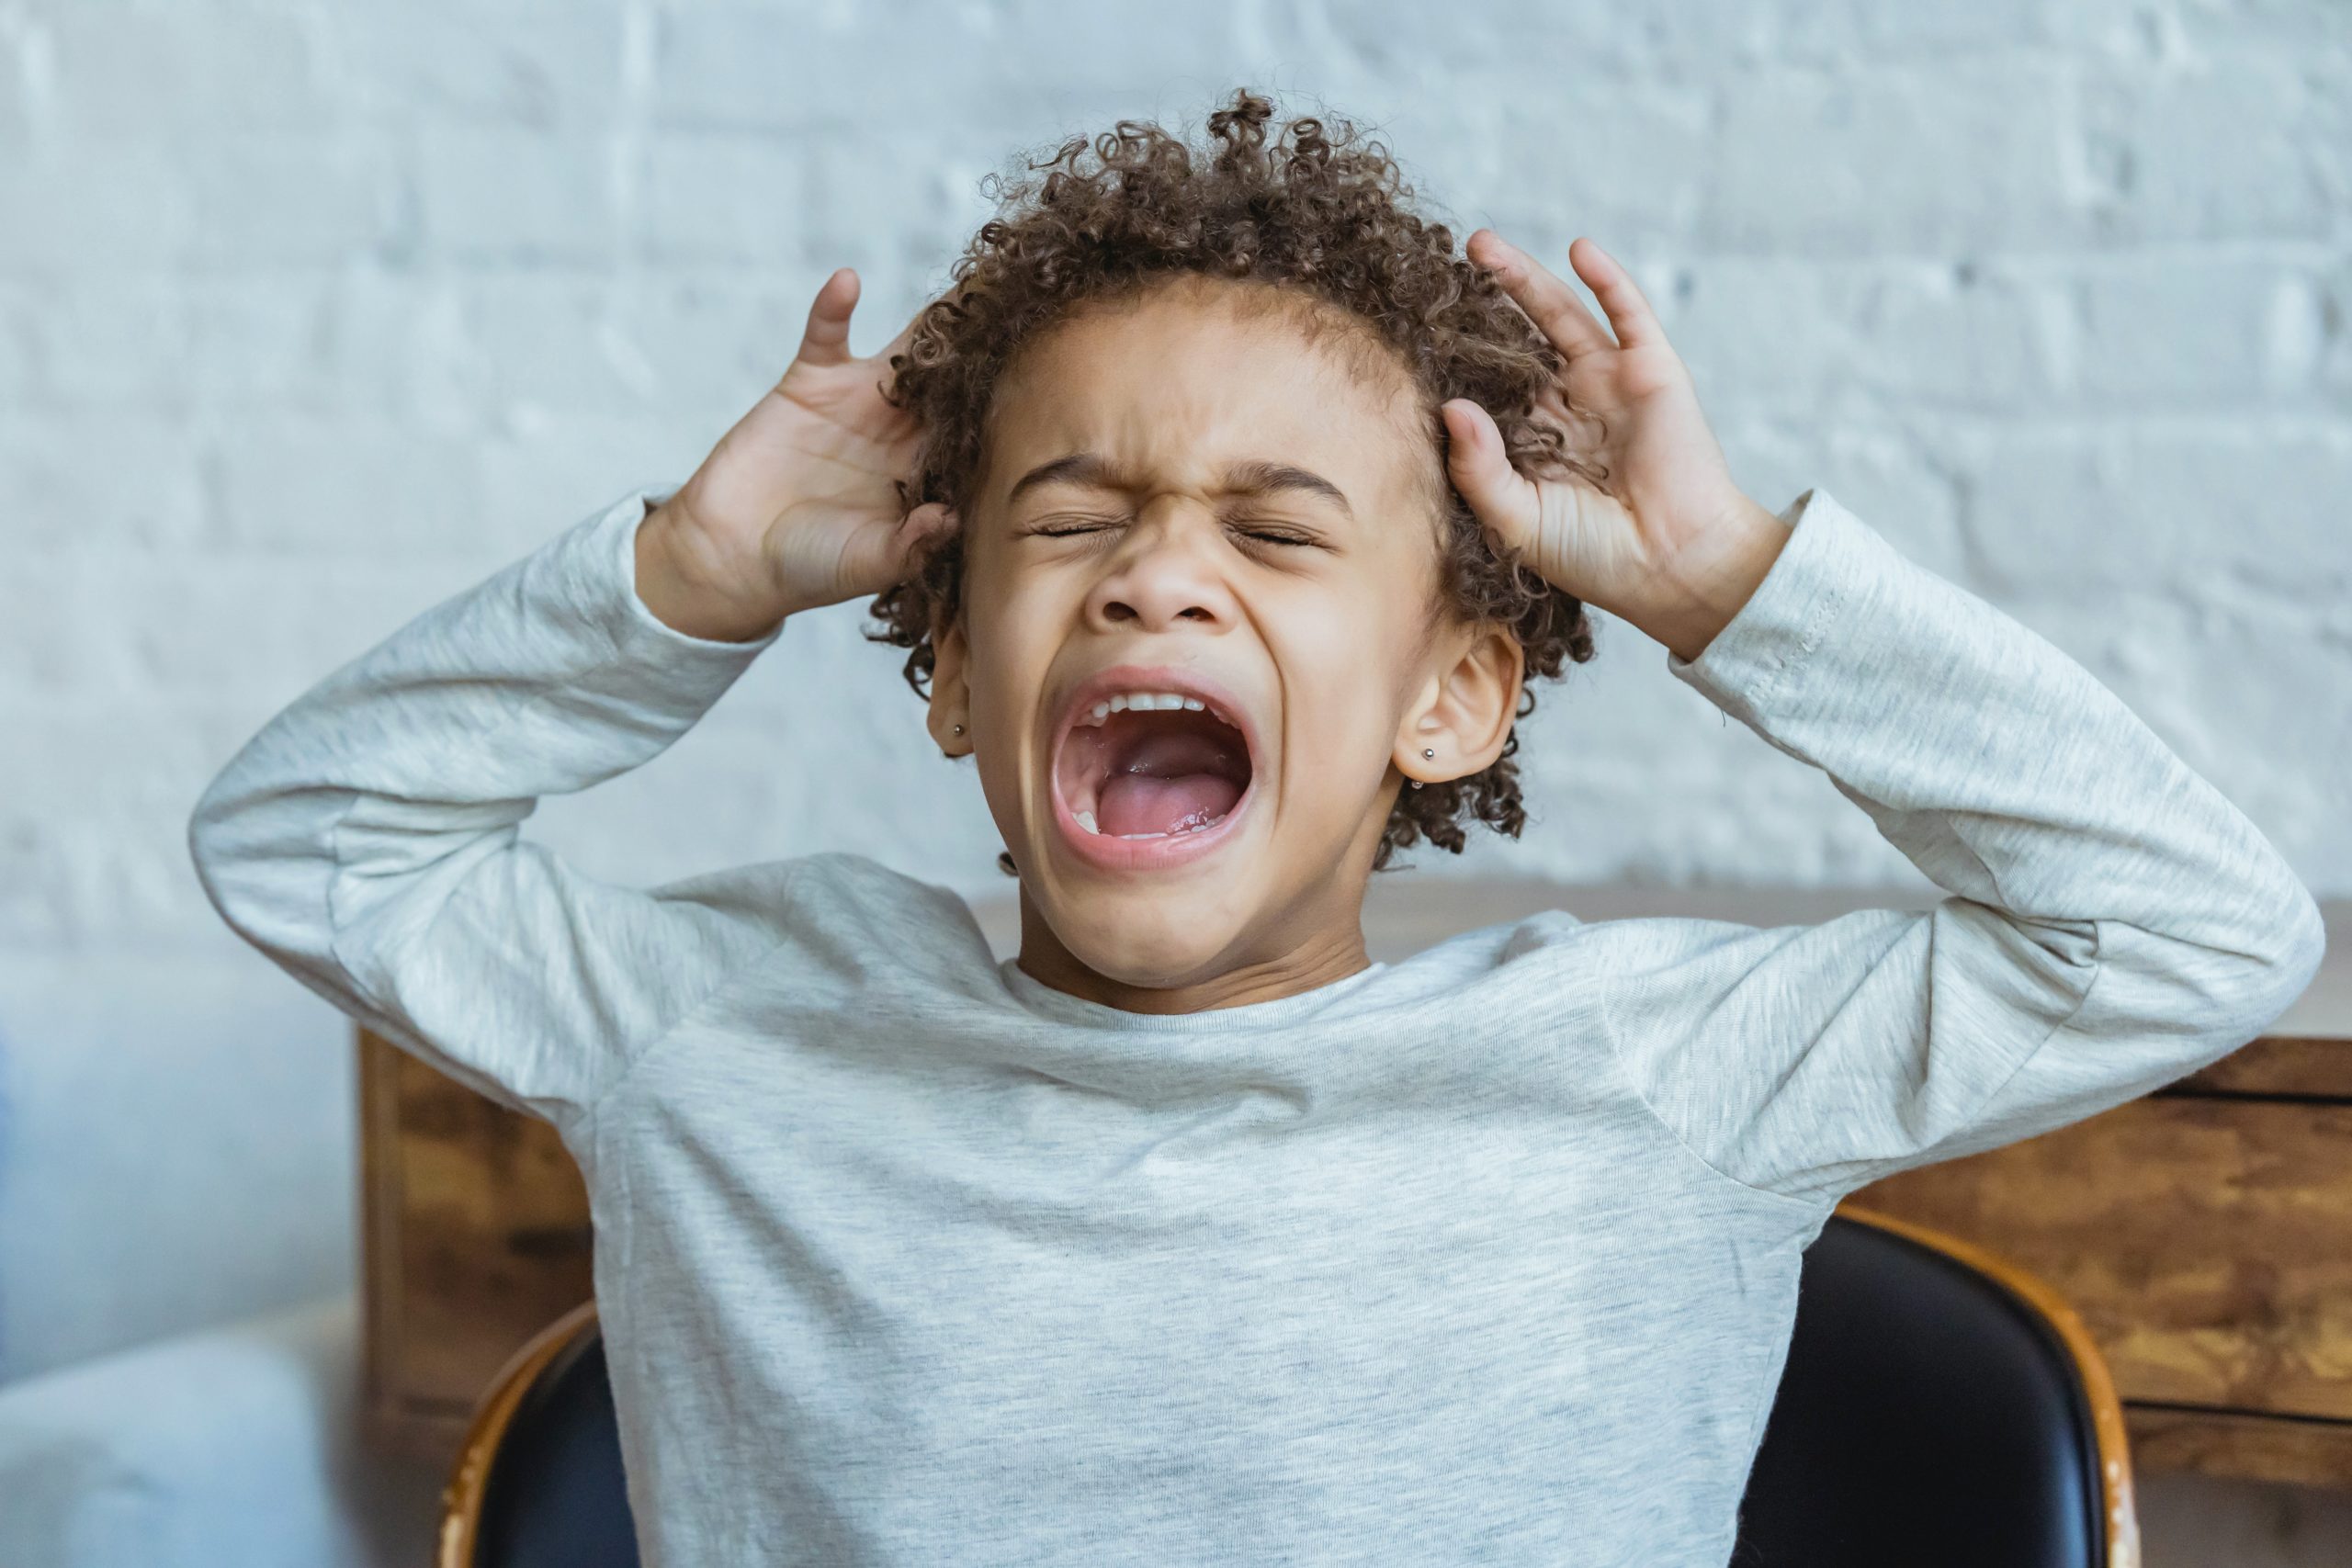 A young boy with short curly hair has his eyes closed, is screaming and has his hands on his head. He is throwing a tantrum.